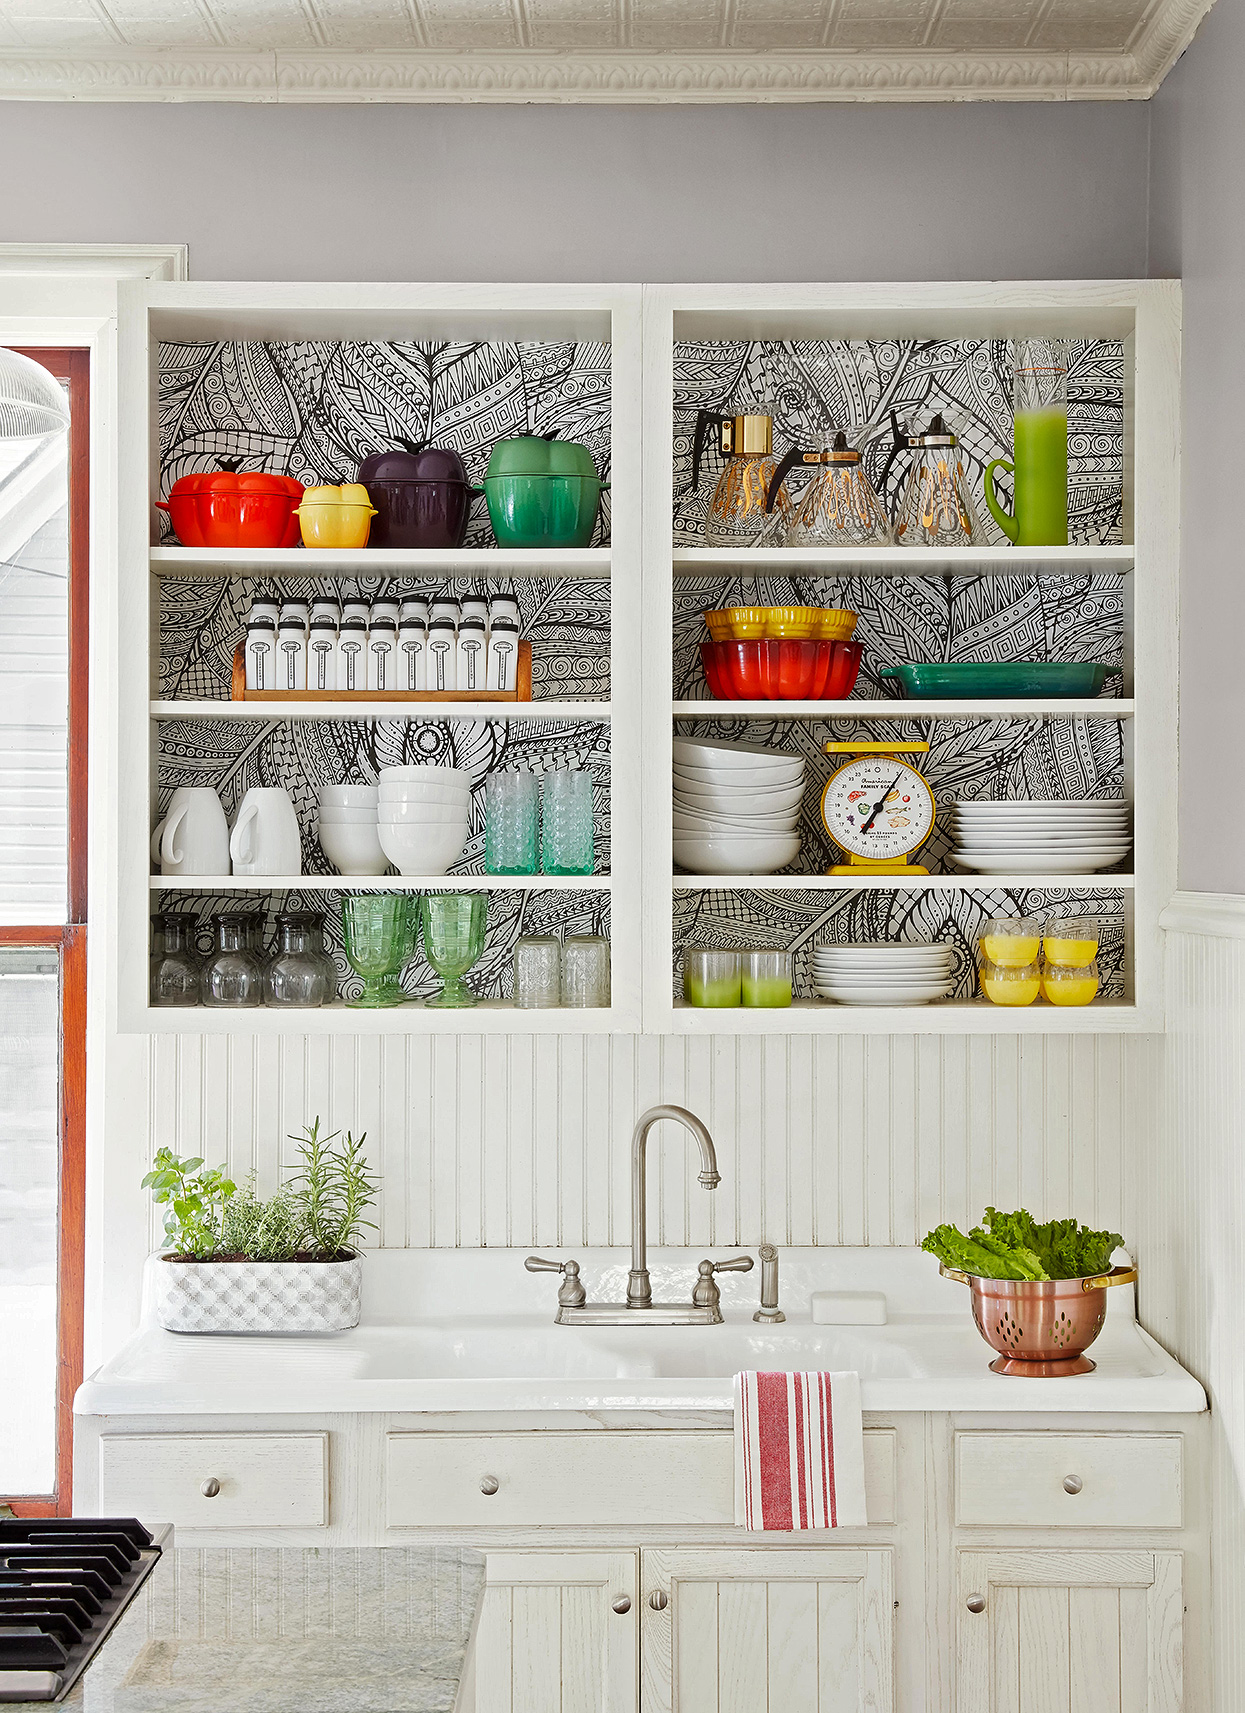 Safe and Efficient Kitchen Wall Shelf